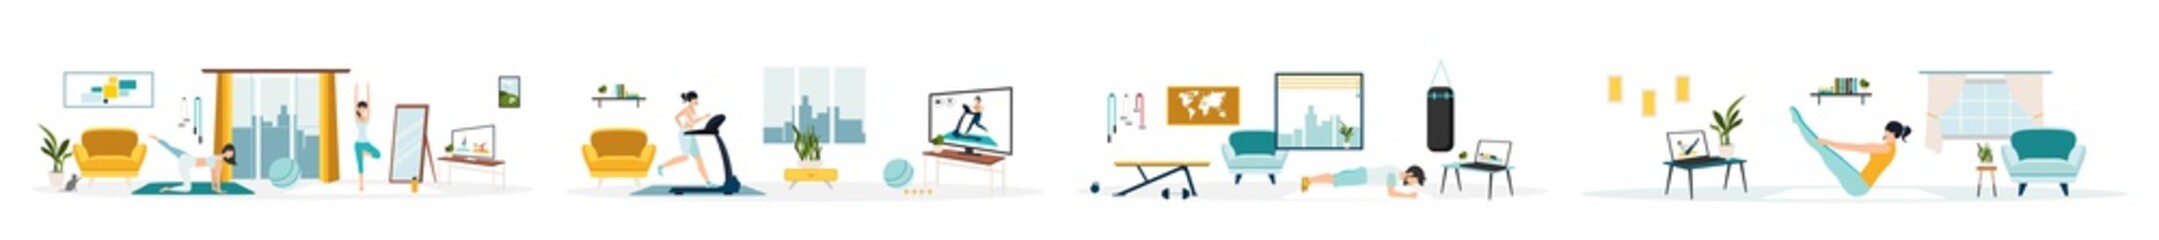 workouts online, set. Stay at home. keep fit. A positive girl and a man are doing exercises on a laptop and a monitor. Healthy lifestyle. Coronavirus quarantine isolation. Vector illustration.